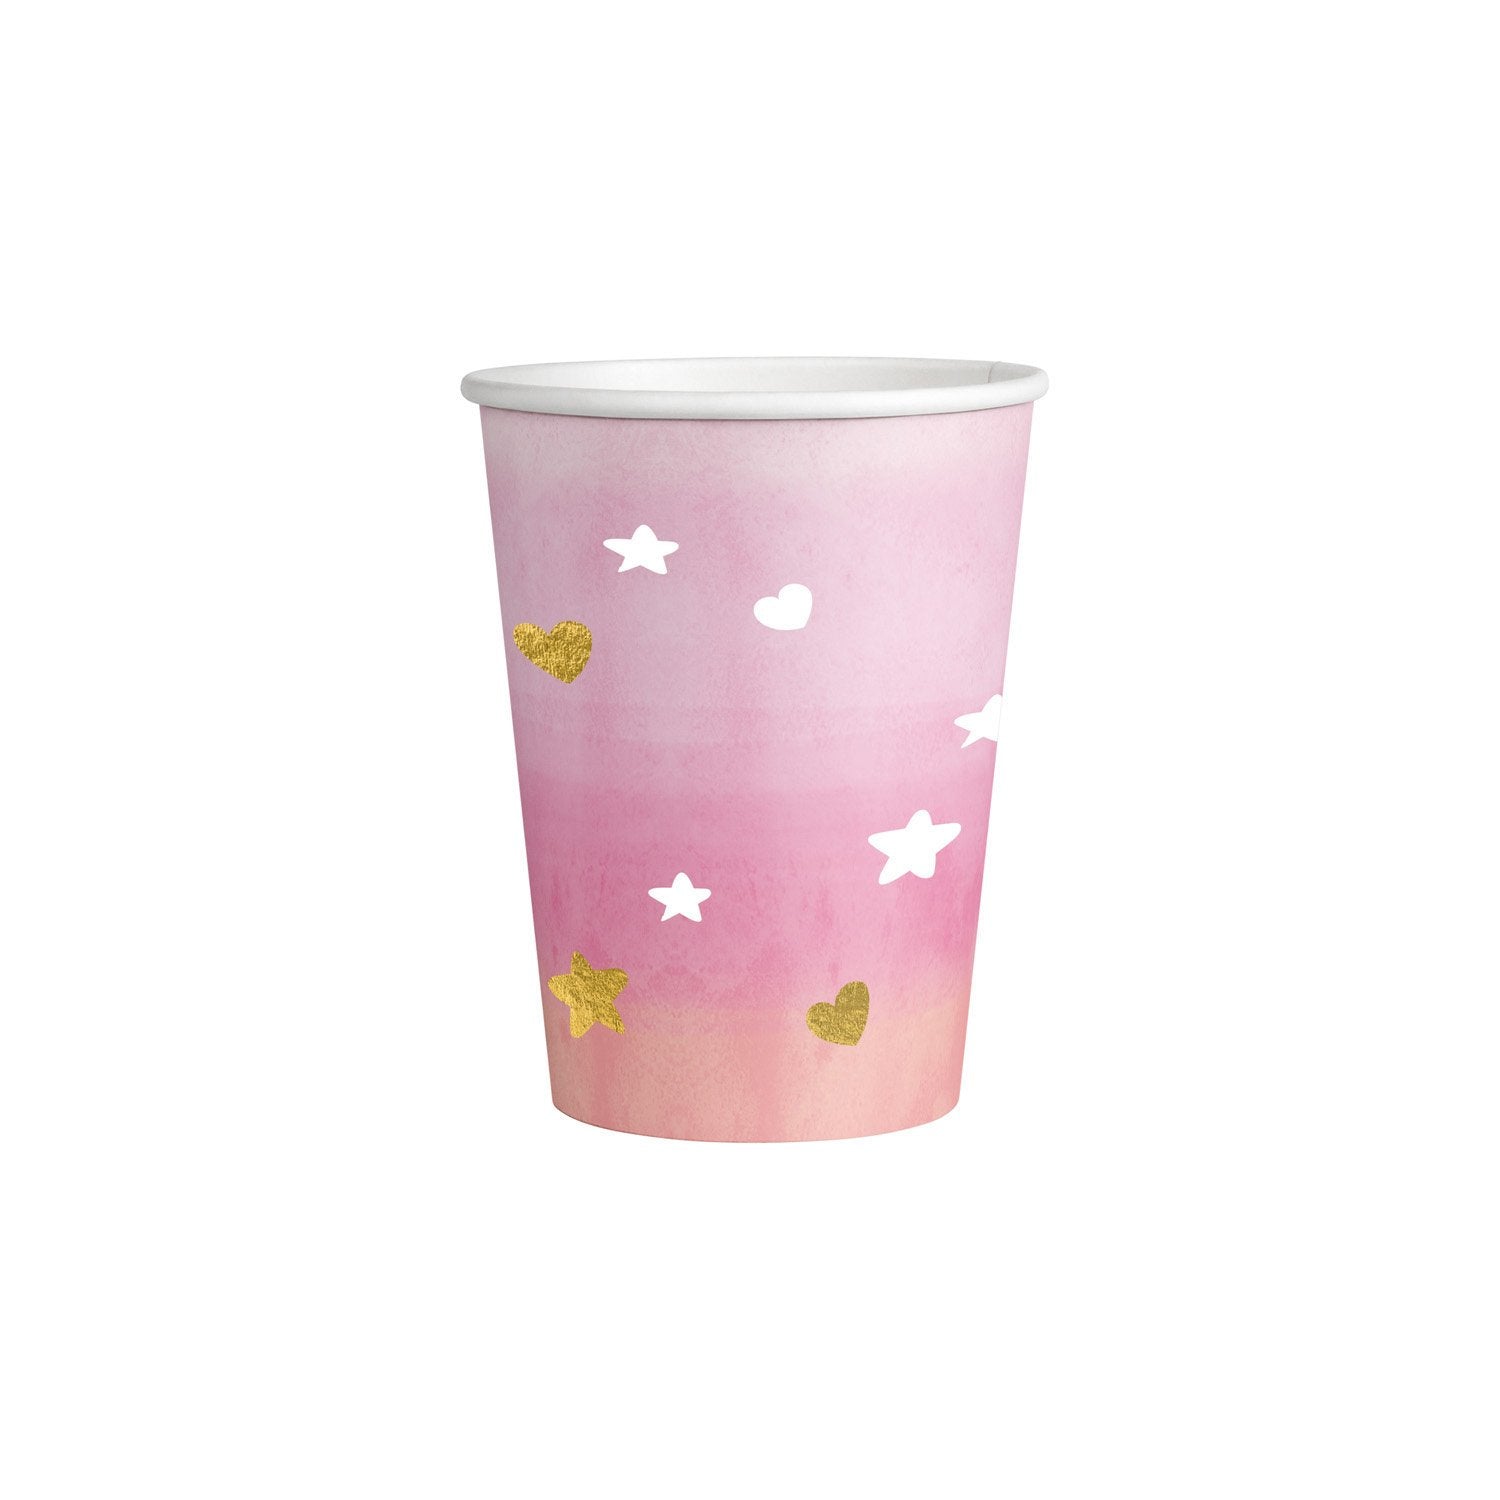 Oh Baby Girl paper cup 250 ml 8pcs/8 Cups Oh Baby Girl Hot Stamped 250 ml